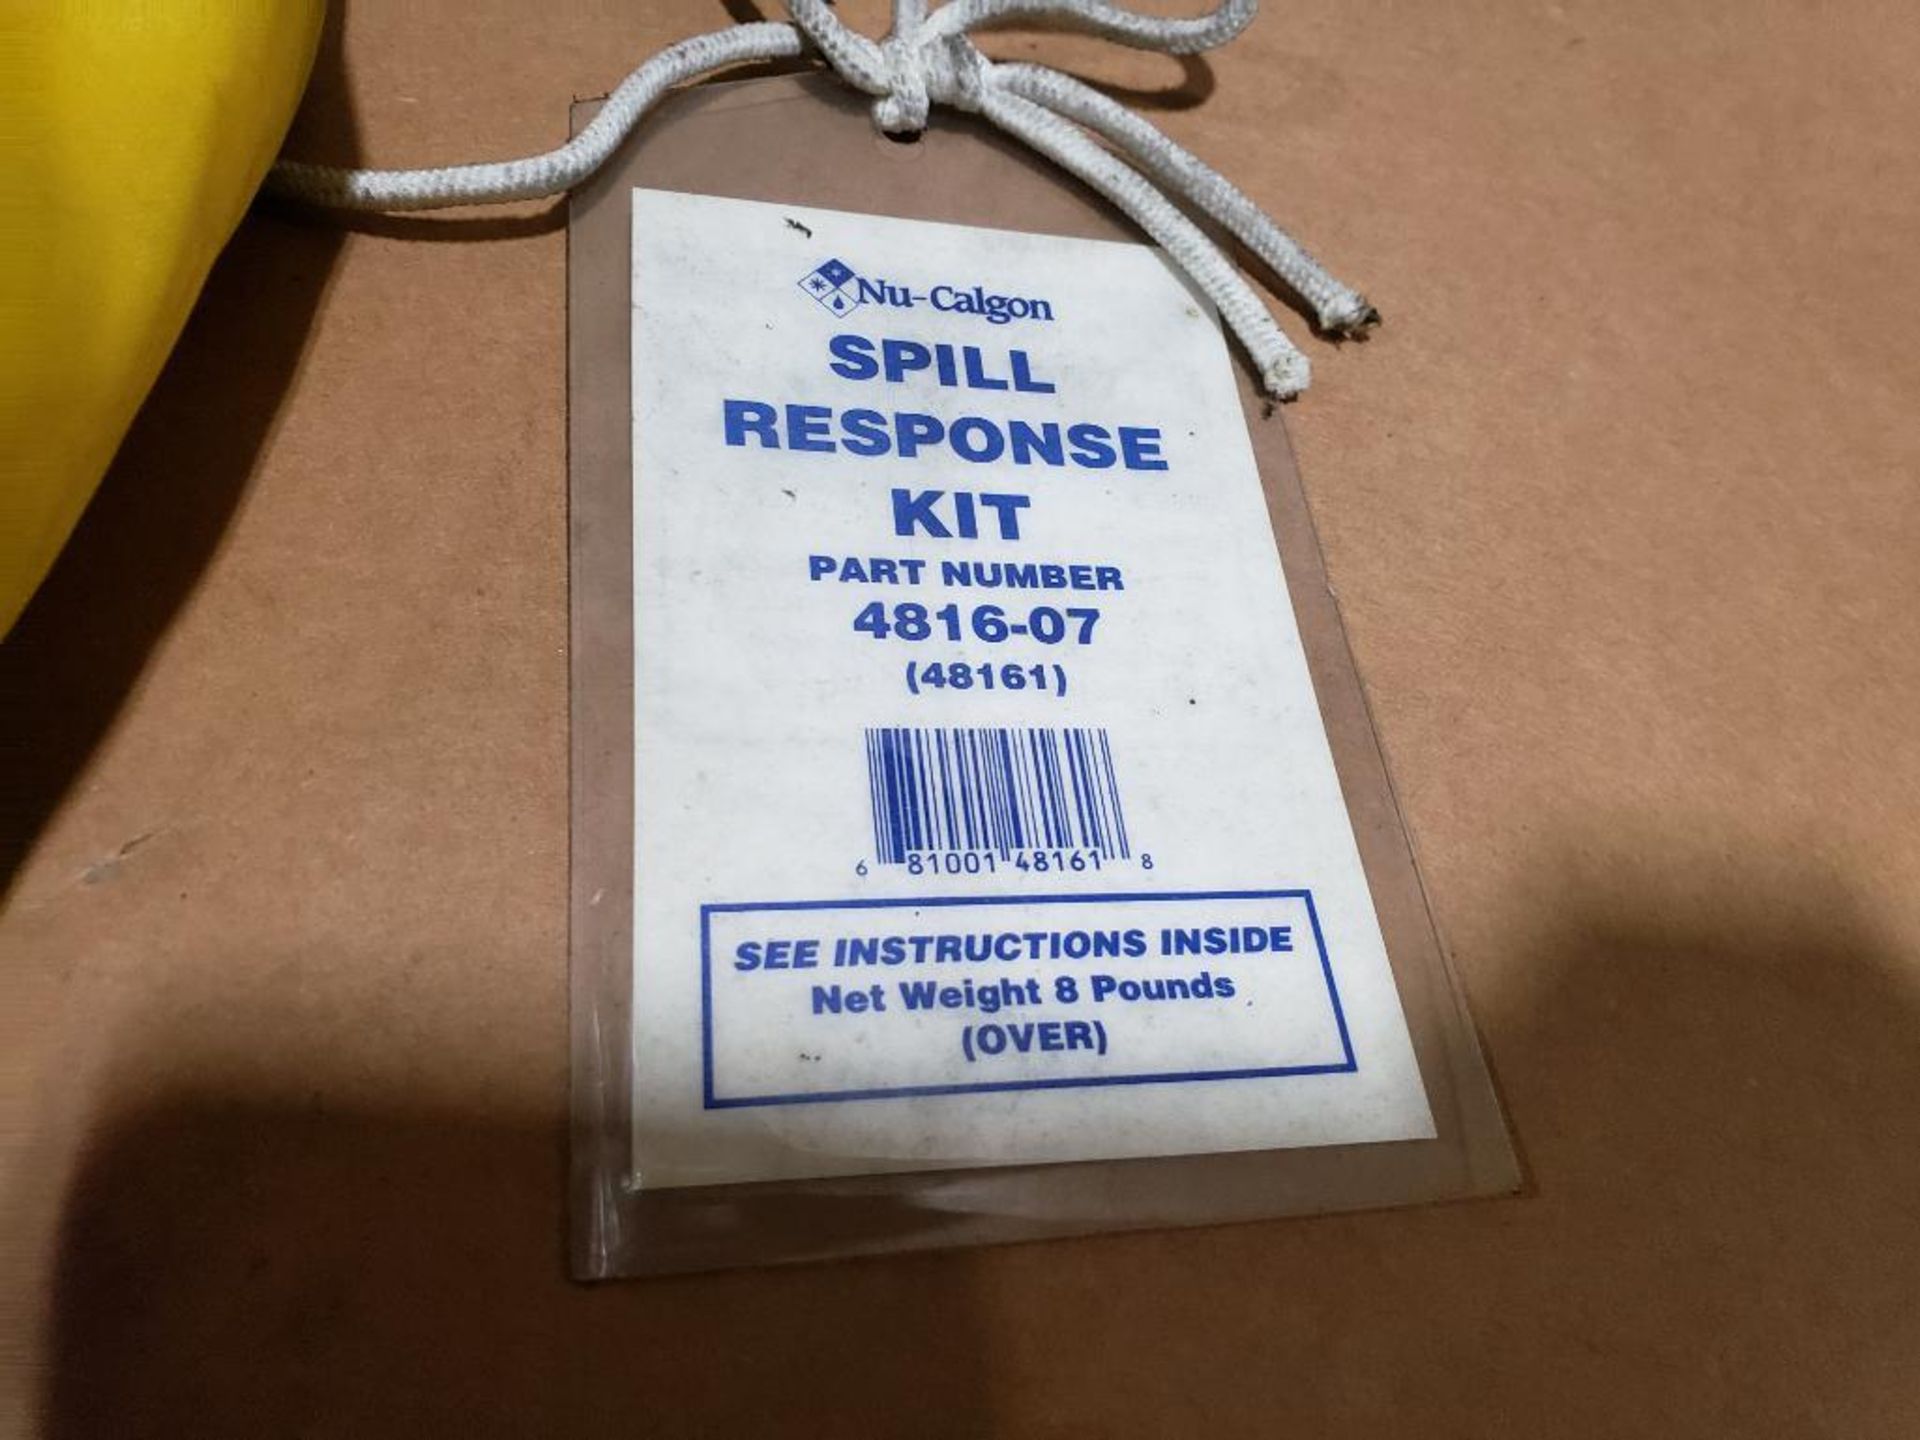 Qty 2 - Nu-Colgon spill response kit. Part number 4816-07. - Image 2 of 5